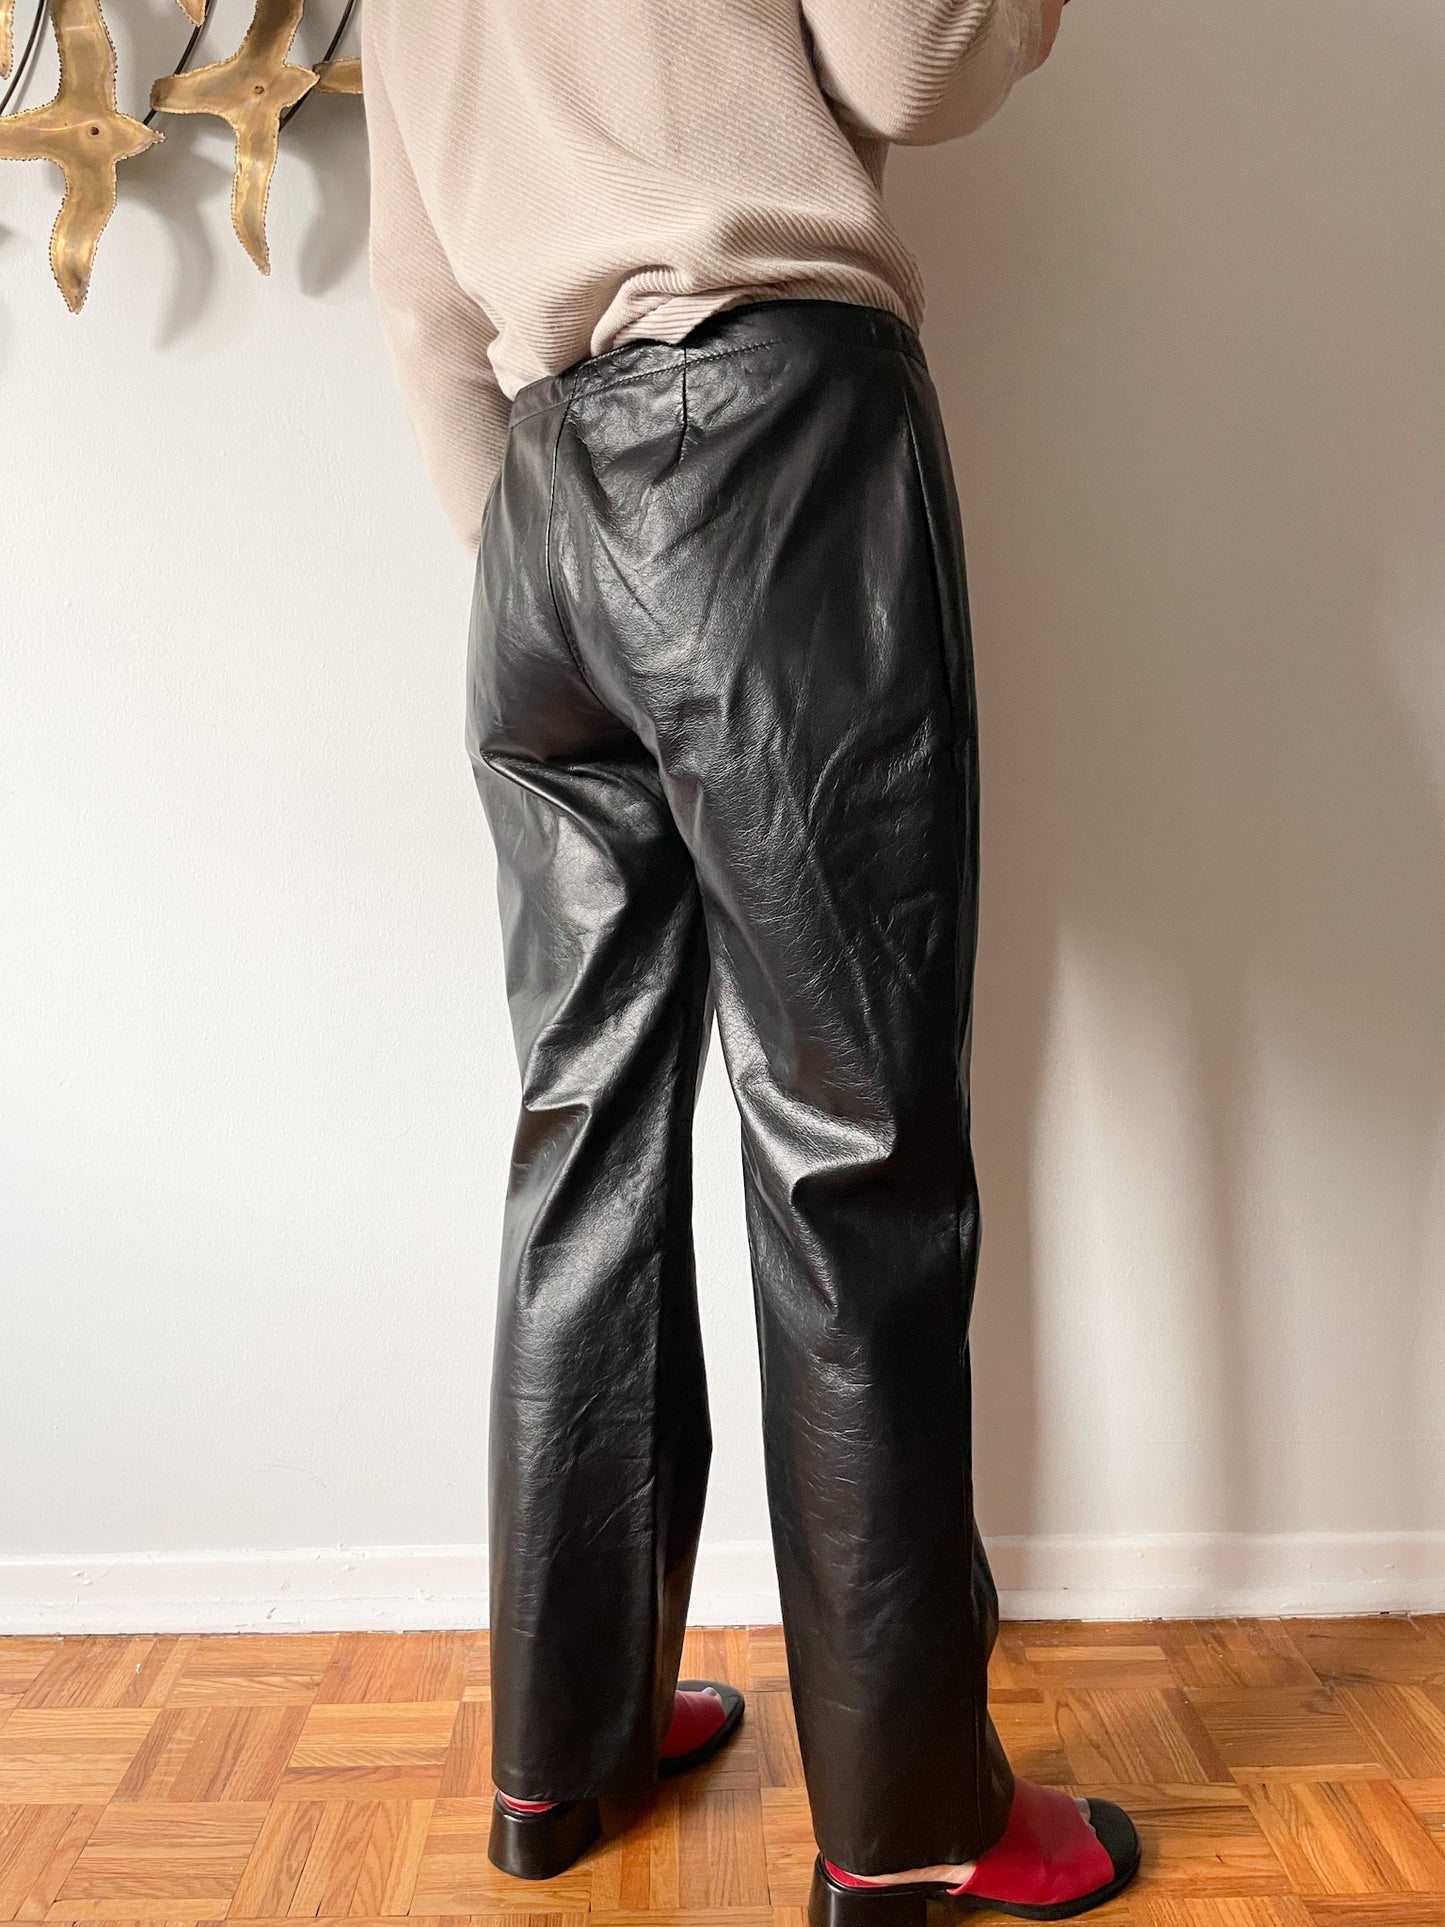 Vintage Genuine Leather Trousers in Black for Women Size S Straight Leg Low  Waist Minimal Leather Pants With Viscose Lining NVS554 -  Canada